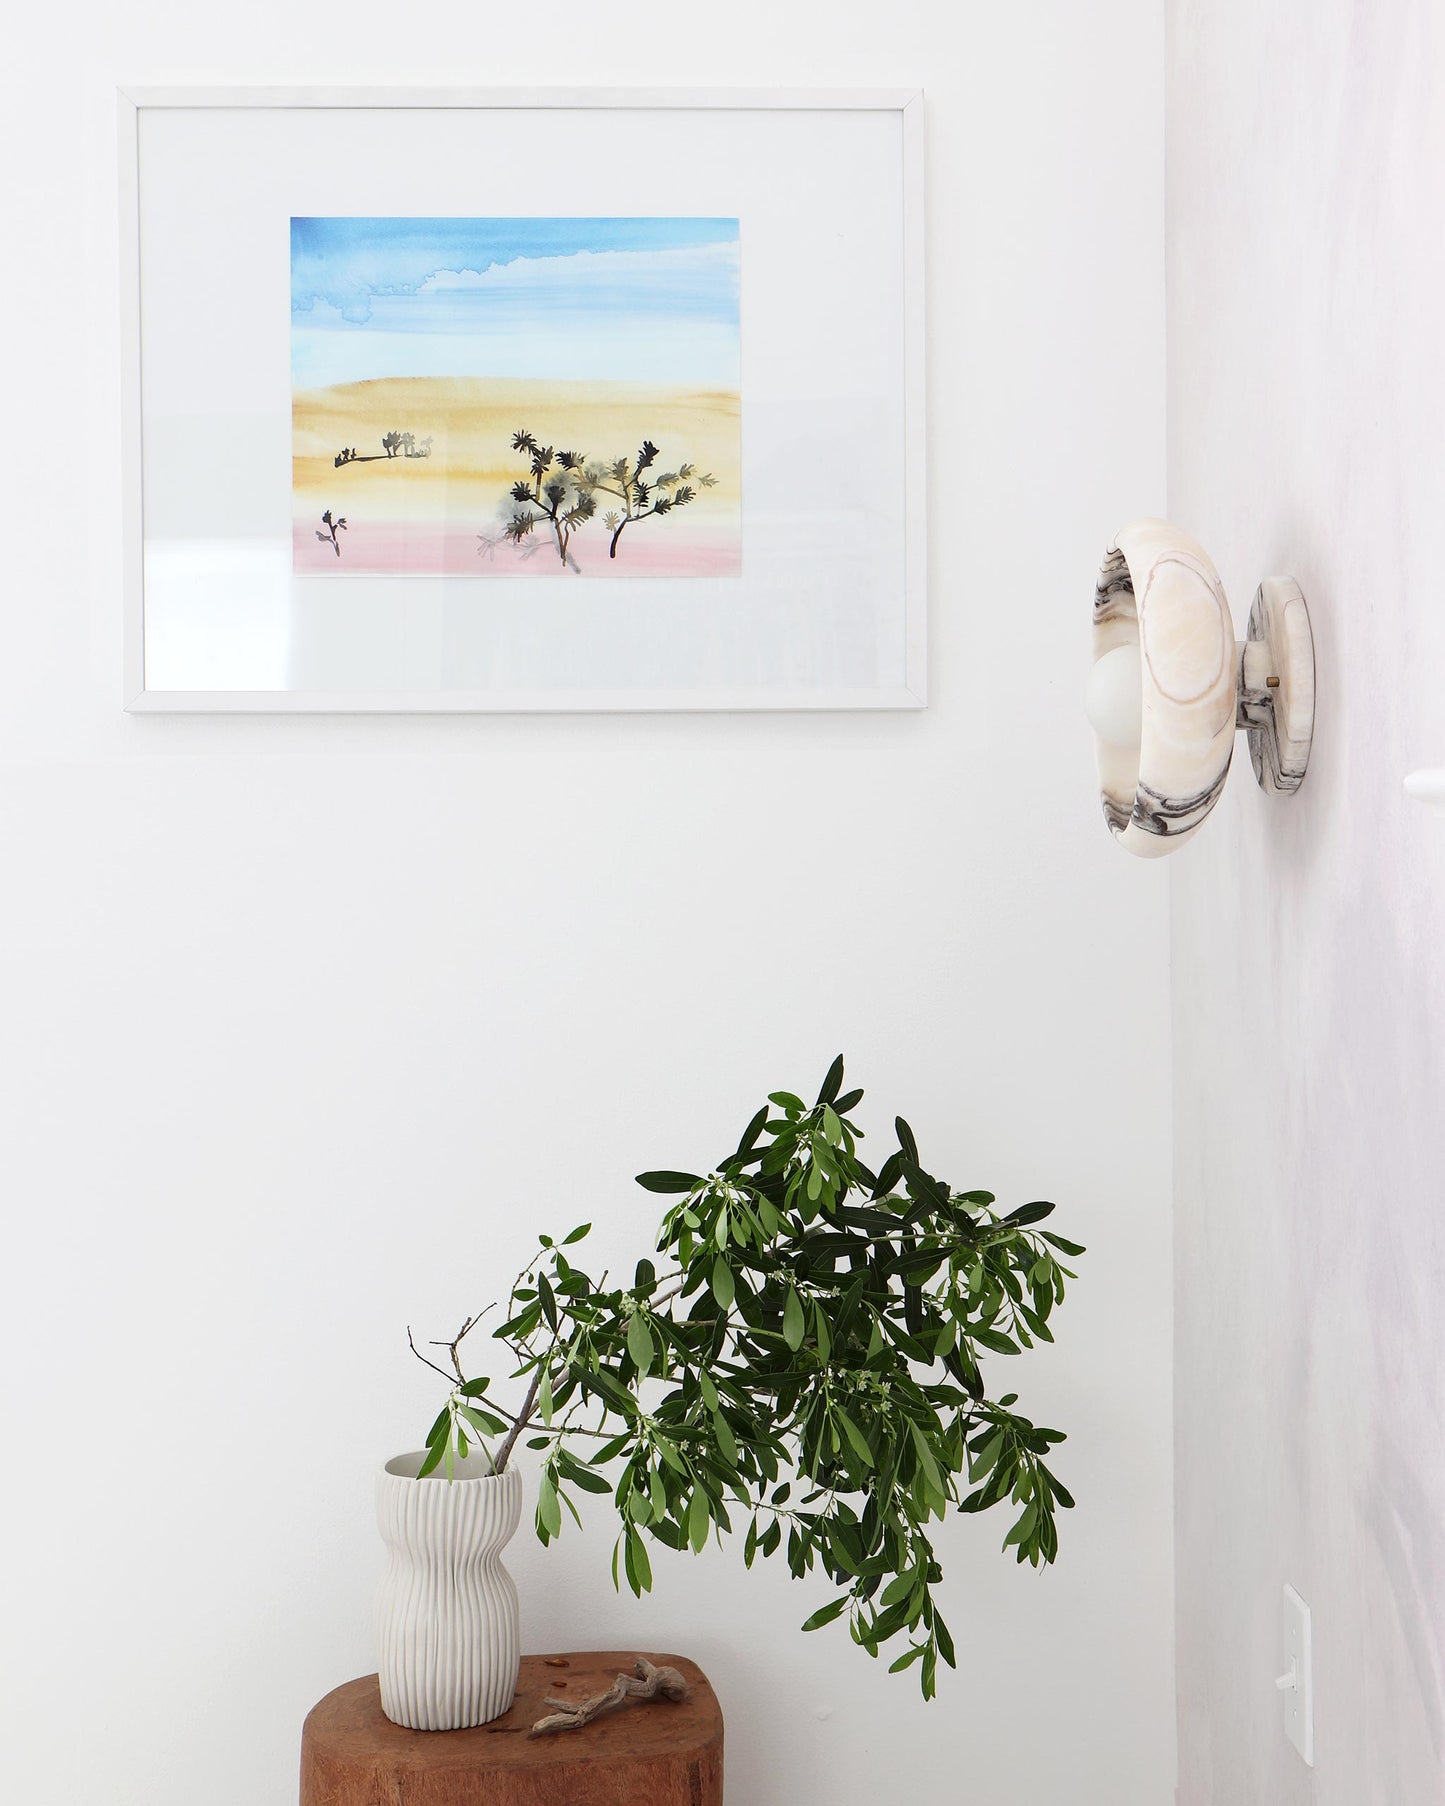 A Shore Pine Print of a desert scene, created by the artist, hangs above a wooden stool